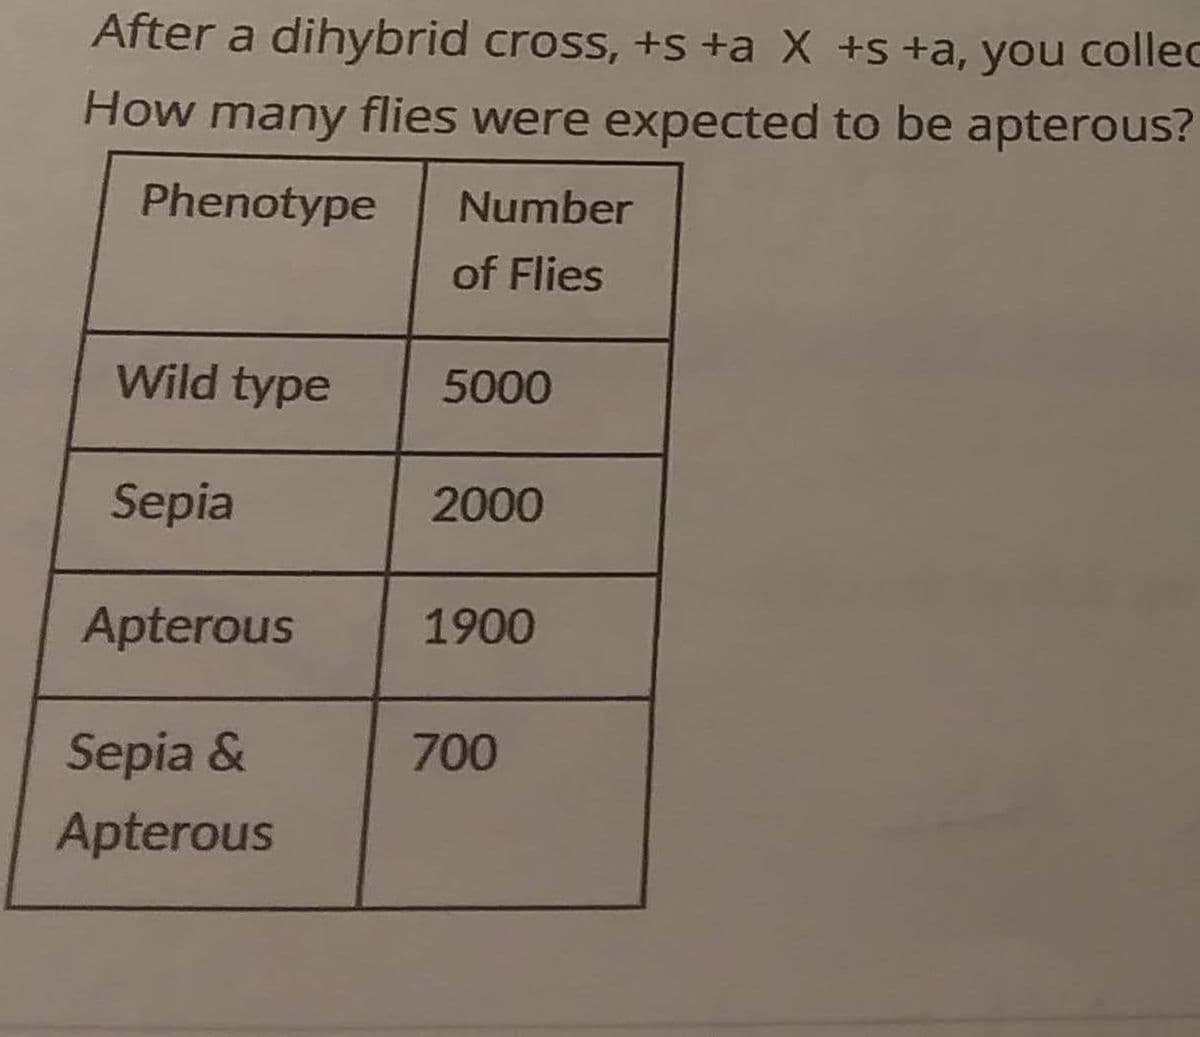 After a dihybrid cross, +s +a X +s +a, you collec
How many flies were expected to be apterous?
Phenotype
Number
of Flies
Wild type
5000
Sepia
2000
Apterous
1900
Sepia &
700
Apterous
